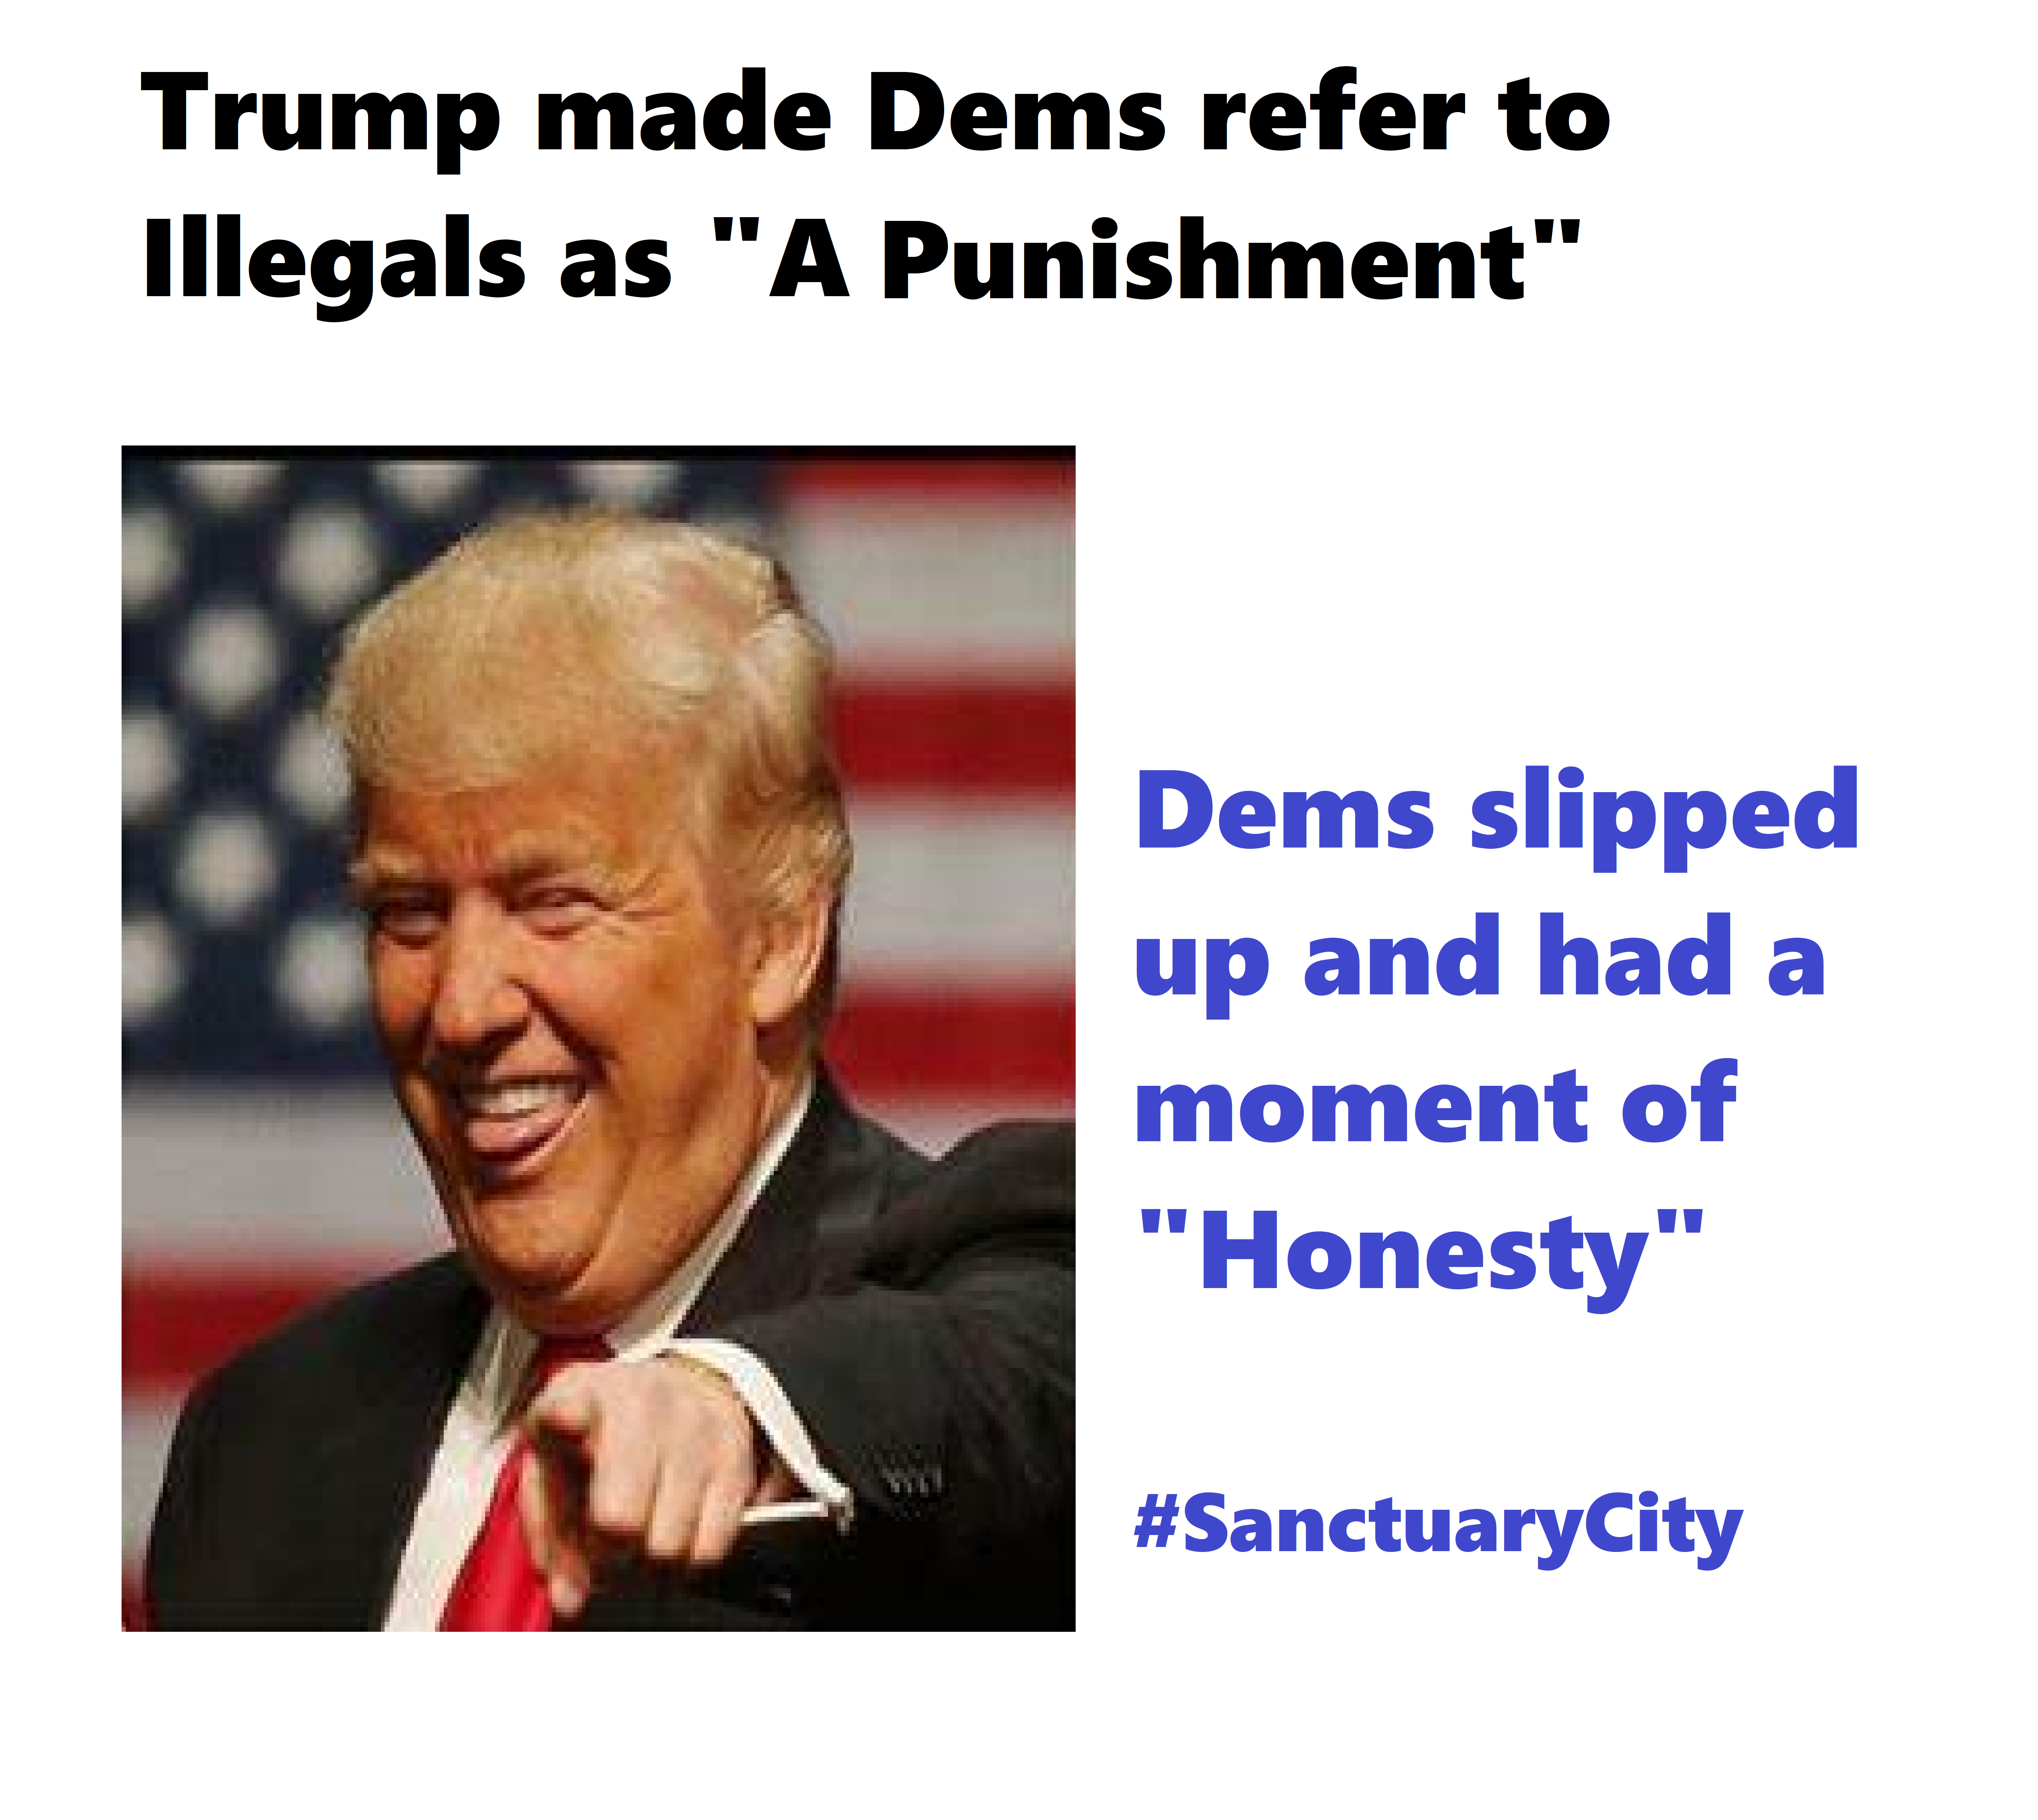 Conservative memes - falsos profetas - Trump made Dems refer to Illegals as "A Punishment" Dems slipped up and had a moment of "Honesty" City